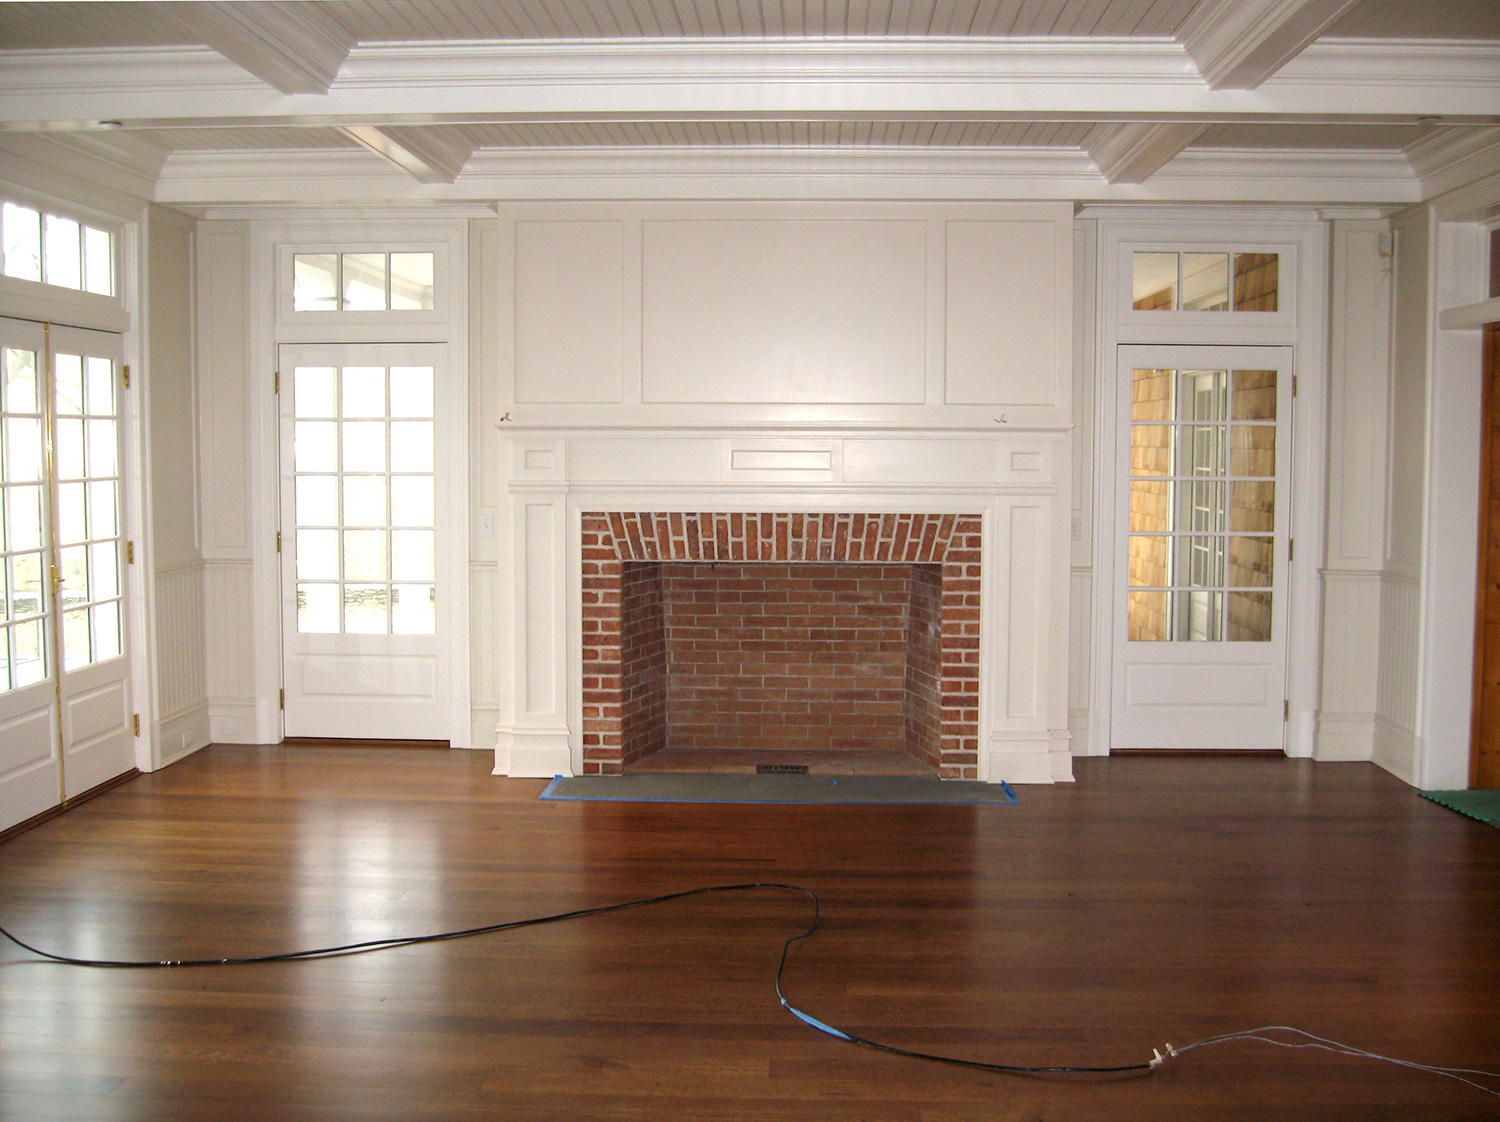 Panel and coffered ceiling set off this fireplace. Hillsdale, NY.